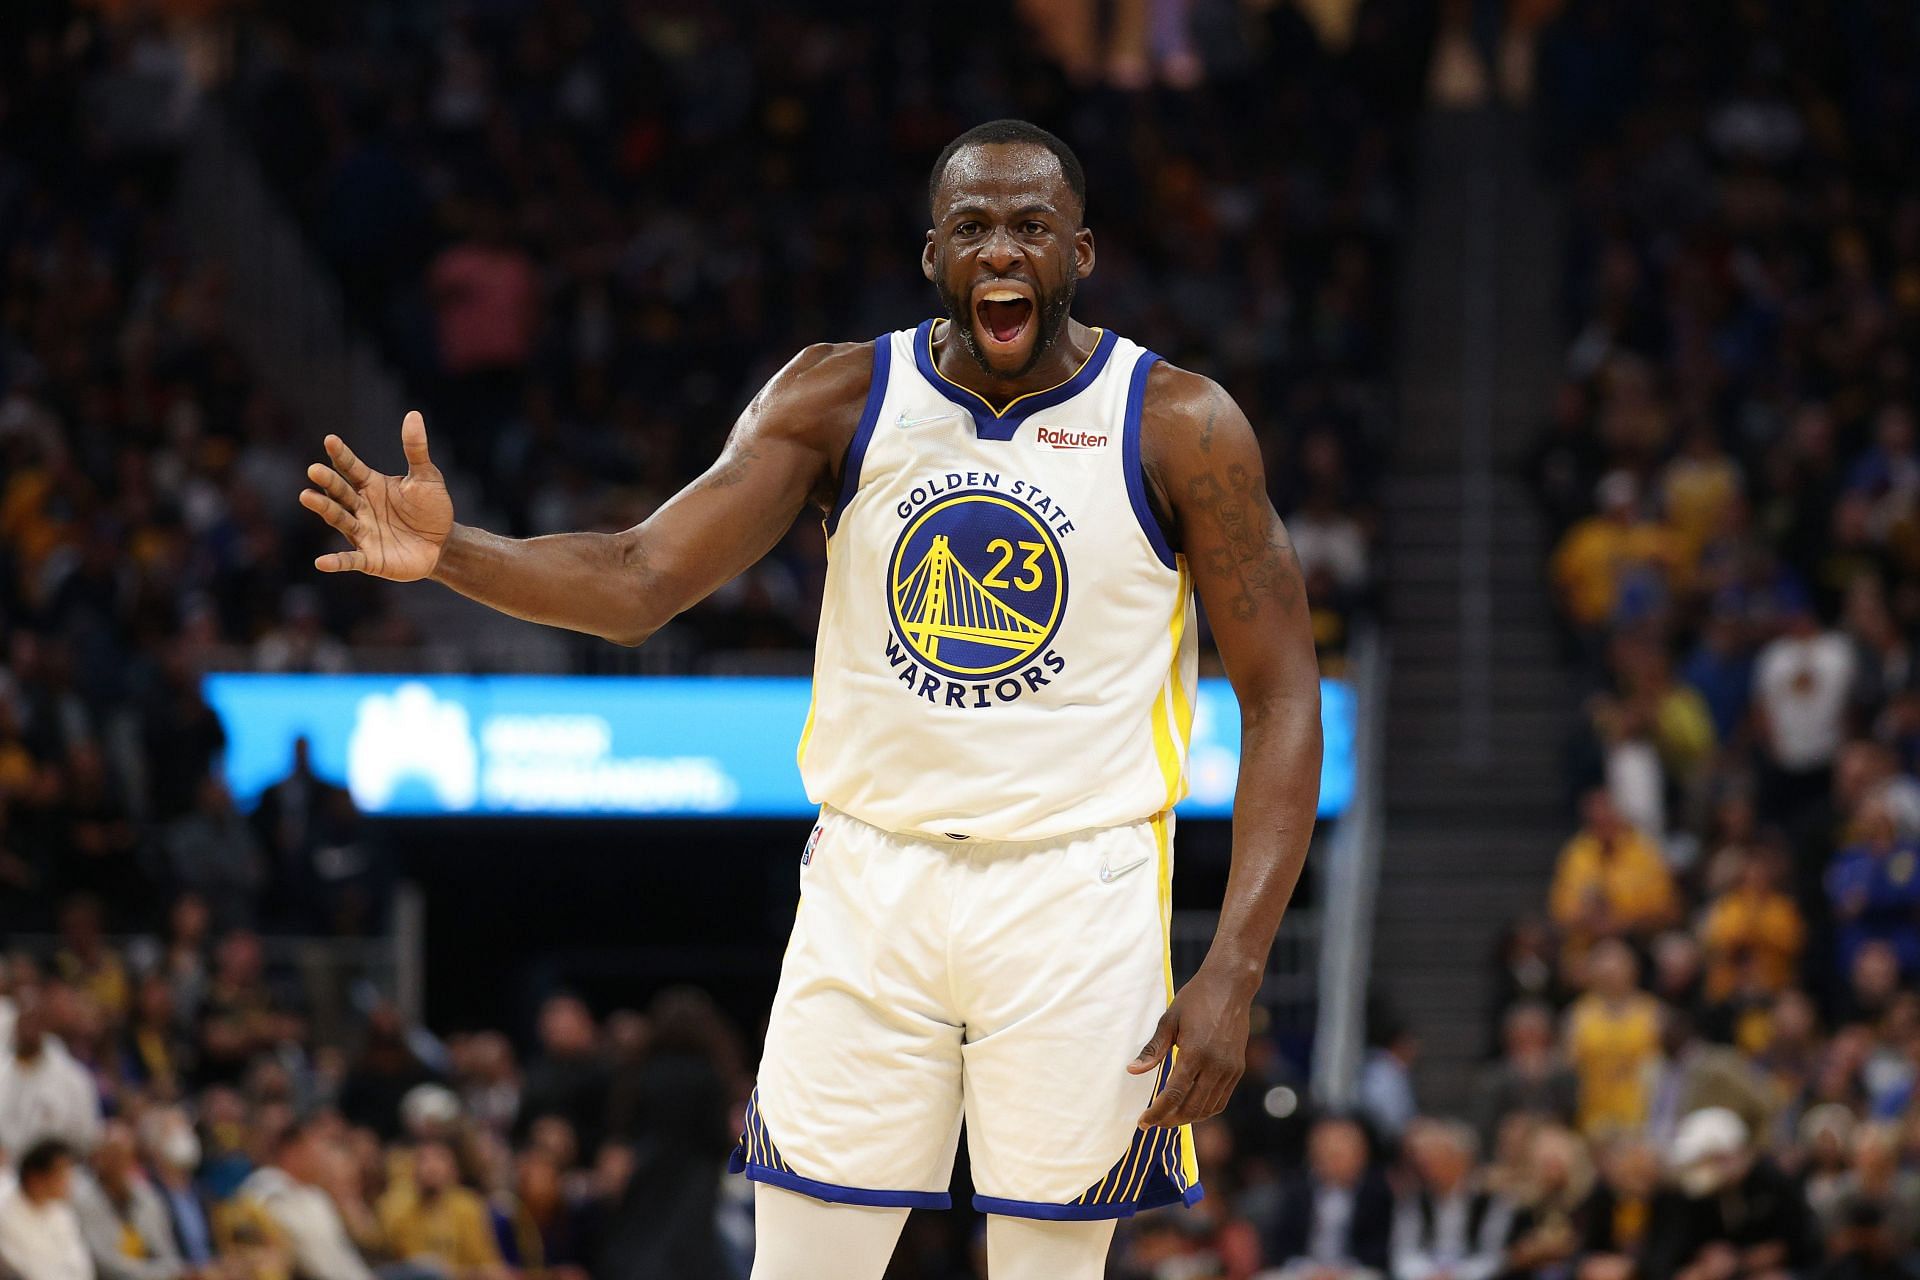 Draymond Green complains about a call during Game 4